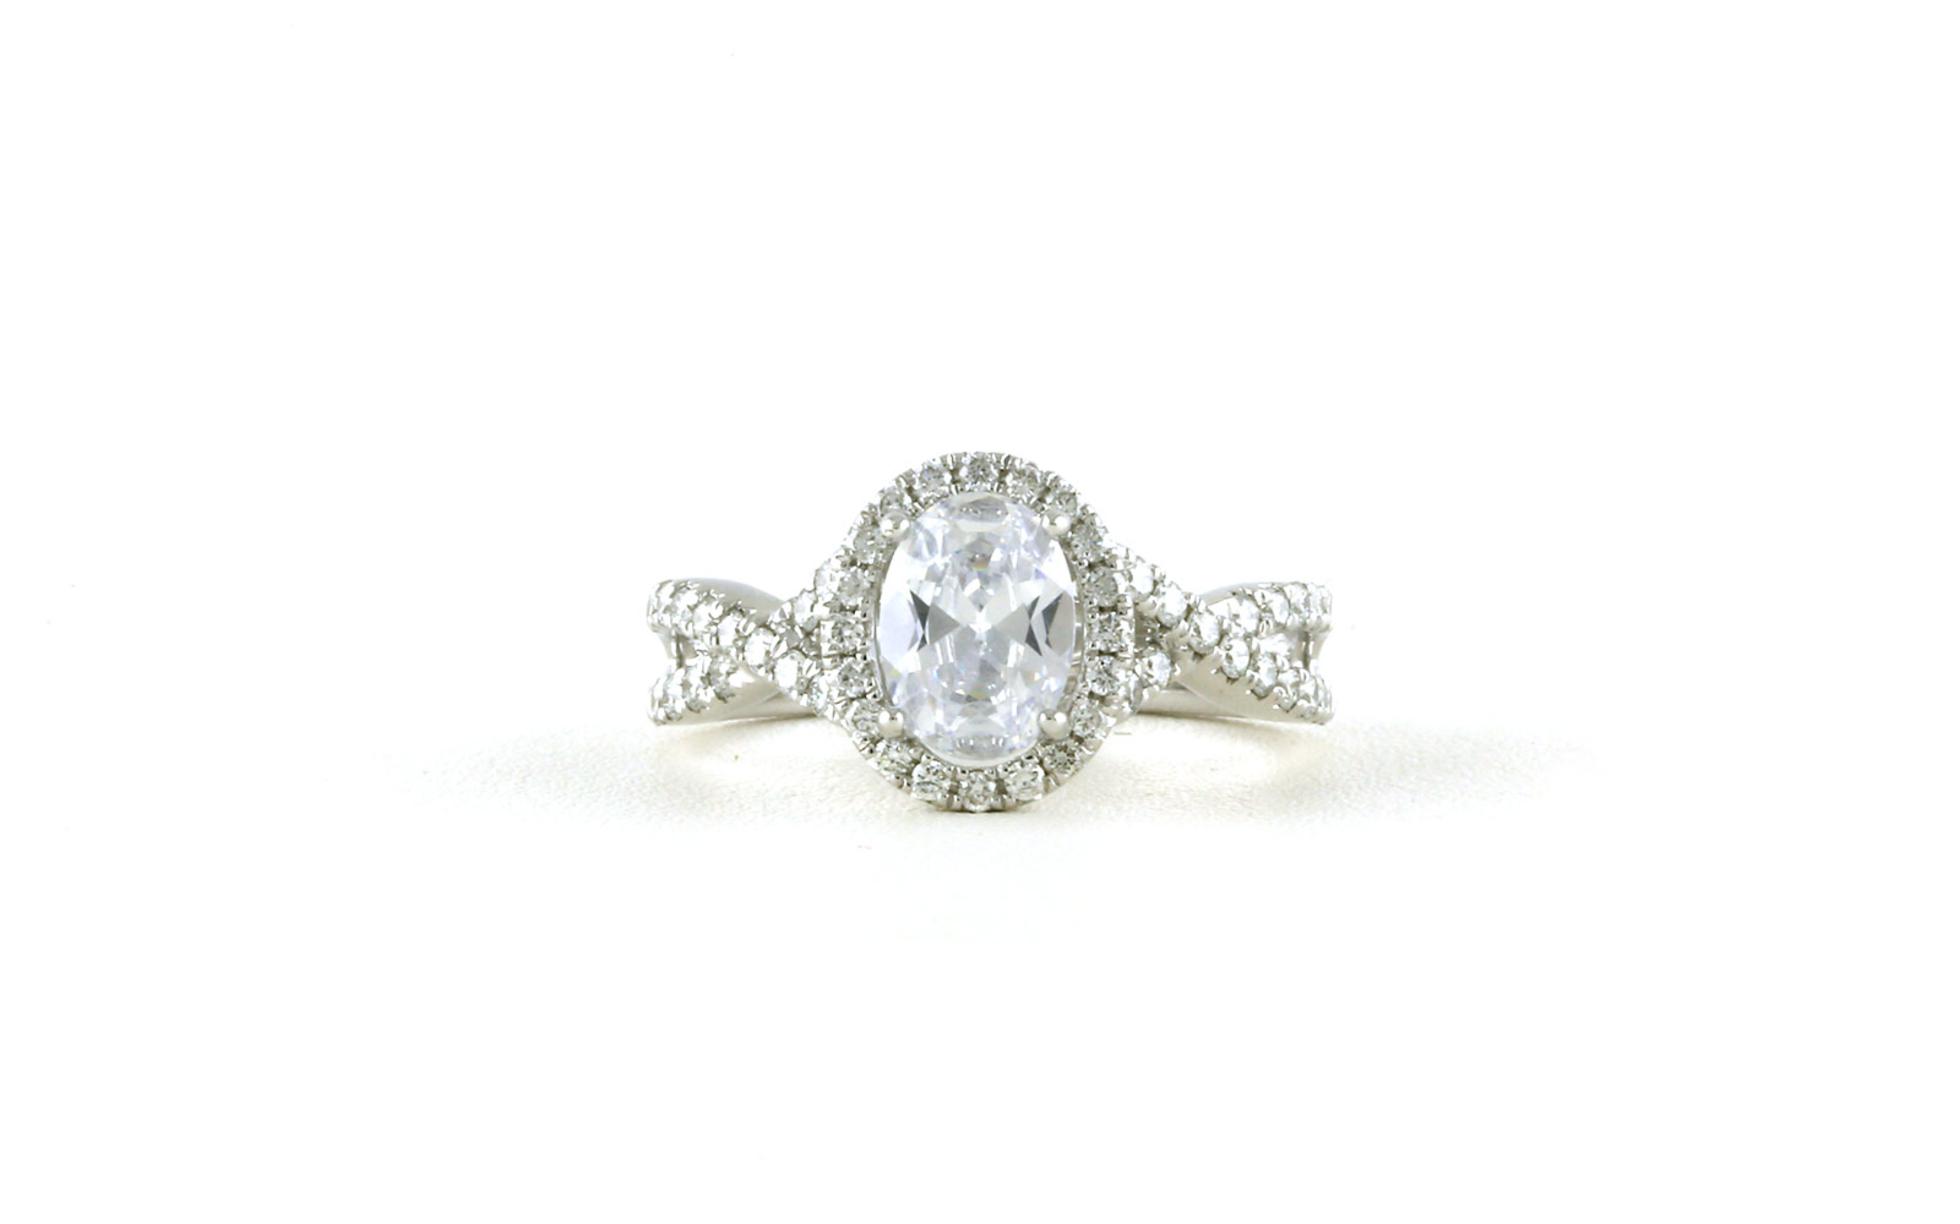 Woven-style Halo-style Oval-cut Engagement Ring Mounting in White Gold